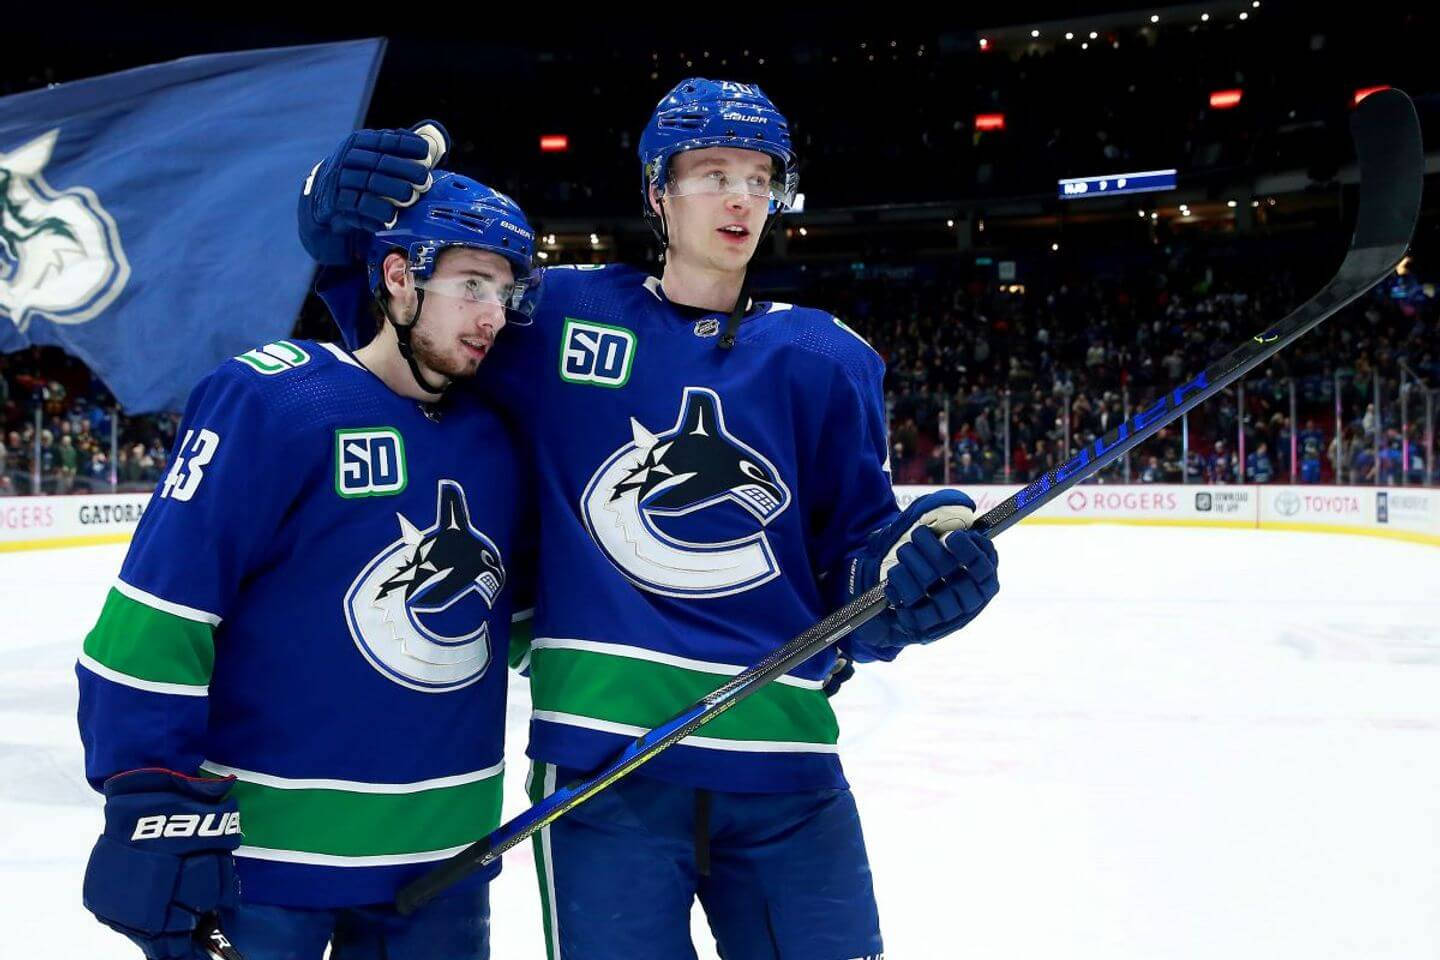 Canadian Nhl Player Elias Pettersson With Quinn Hughes